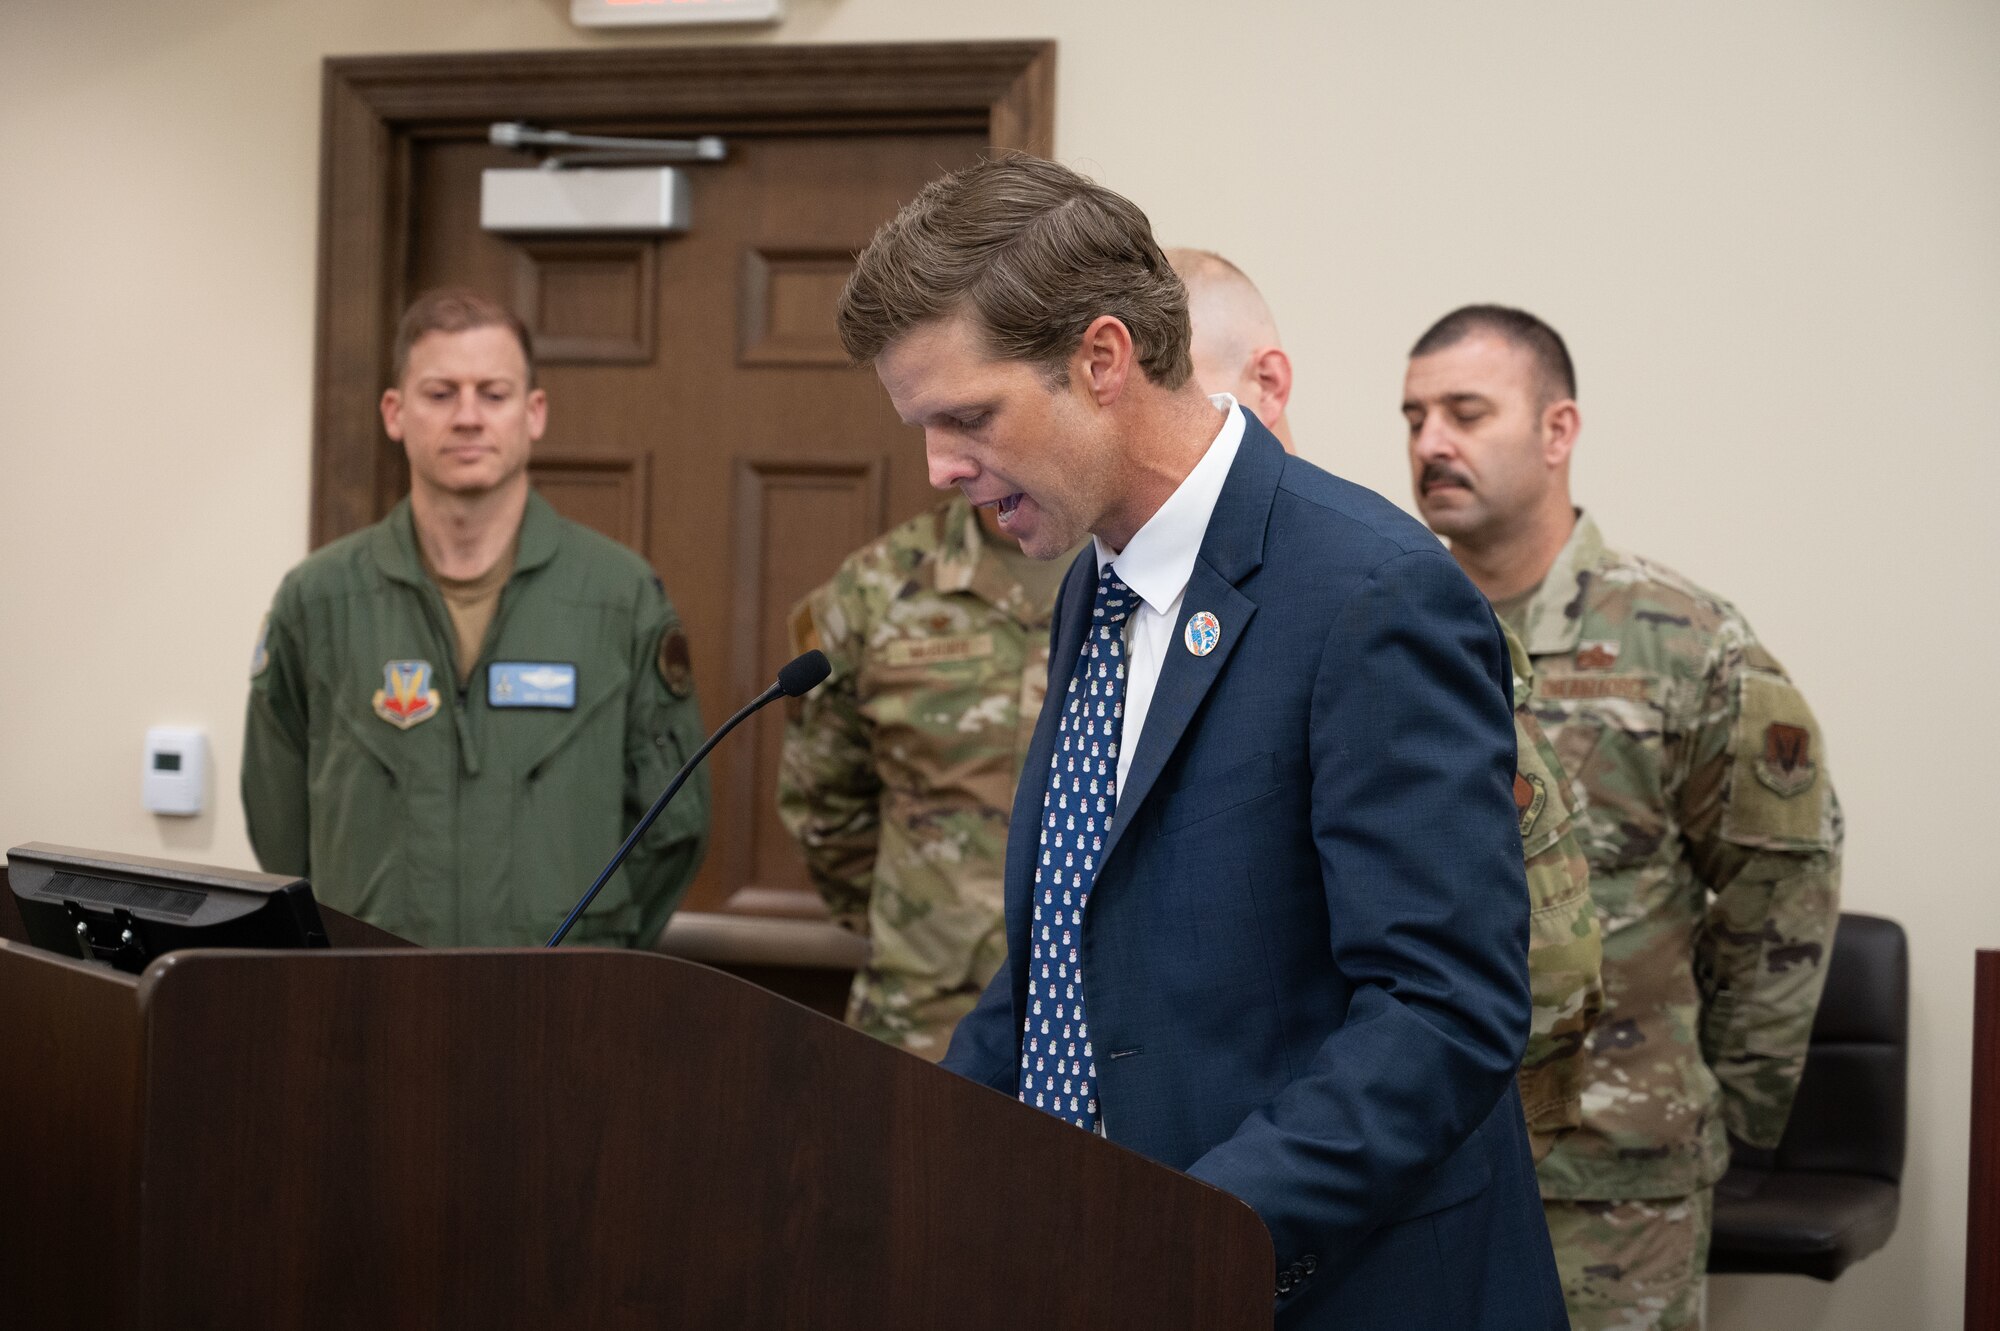 U.S. Airmen from the 114th Electromagnetic Warfare Squadron are pictured with the city of Cape Canaveral Mayor Wes Morrison during a city council meeting held Dec. 19, 2023. The mayor declared Jan. 14, 2024 as '114th EWS Day' in honor of the contributions made by its members, their continued involvement in the community, and their commitment to protecting and defending the values and interests of local residents, and all U.S. citizens. The 114th EWS is a geographically-separated unit of the Florida Air National Guard's 125th Fighter Squadron located at Cape Canaveral Space Force Station. Their mission is to organize, train and equip personnel to conduct electromagnetic attacks in contested, congested and constrained environments downrange, using specialized equipment such as the counter communications system. Previously, the unit operated as the 114th Space Control Squadron before it was redesignated as an electromagnetic squadron in January 2023. (U.S. Air National Guard photo by Tech Sgt. Chelsea Smith)